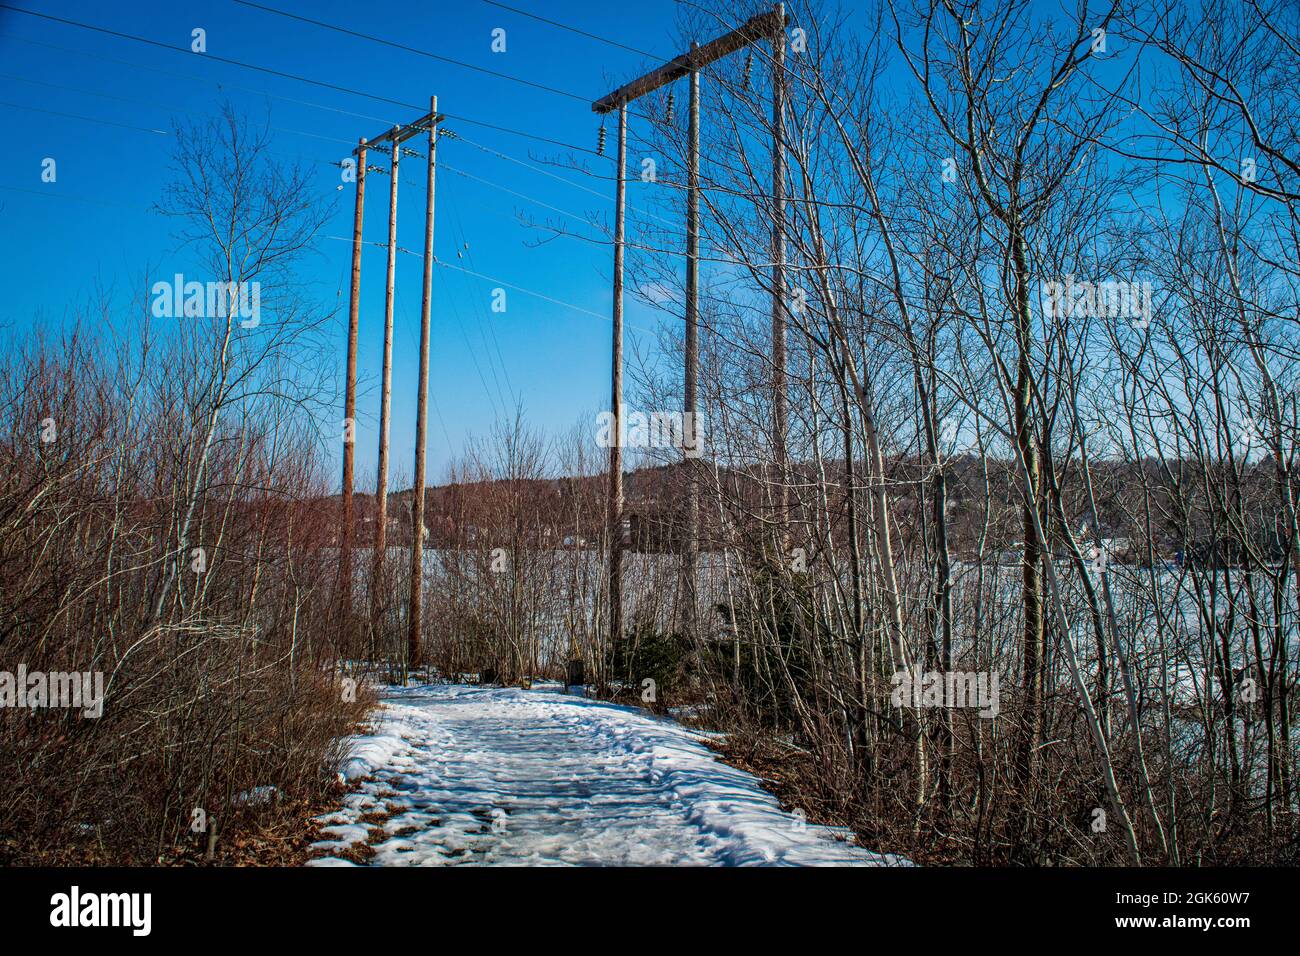 Overhead power lines along the trans canada trail in shubie park Stock Photo